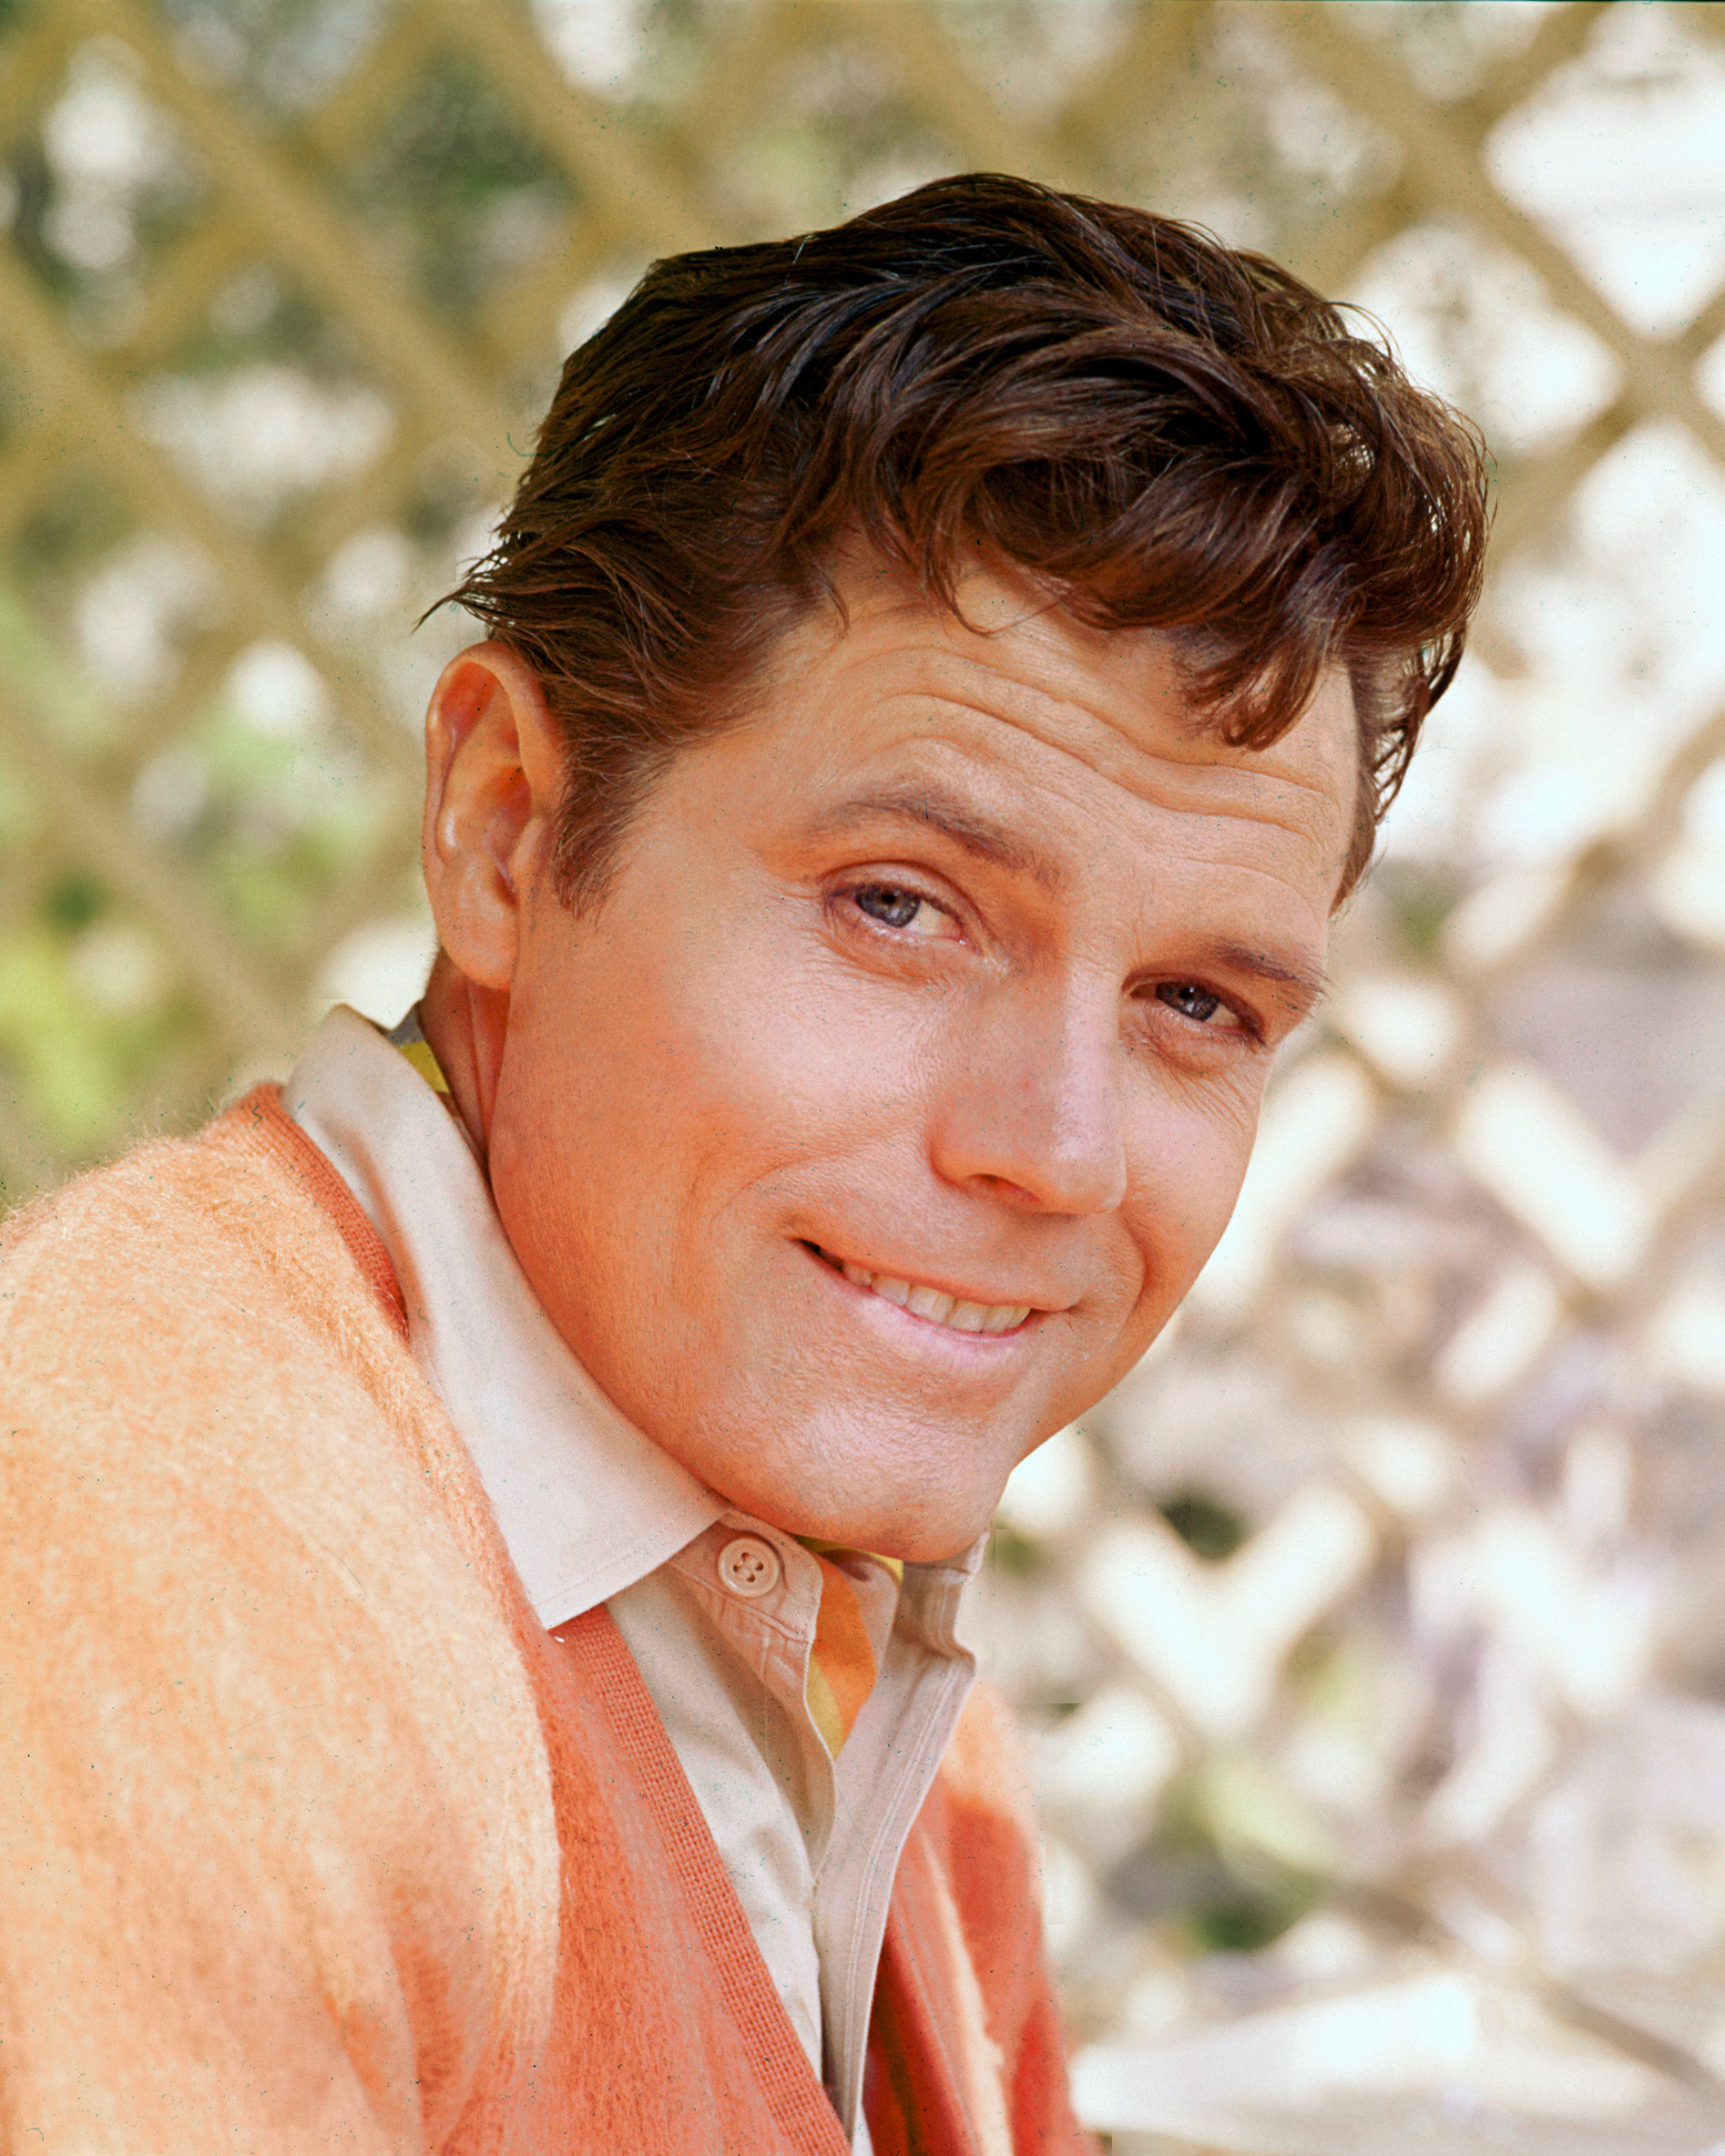 Jack Lord (1920-1998), US actor, smiling in a publicity portrait, circa 1965. | Source: Getty Images